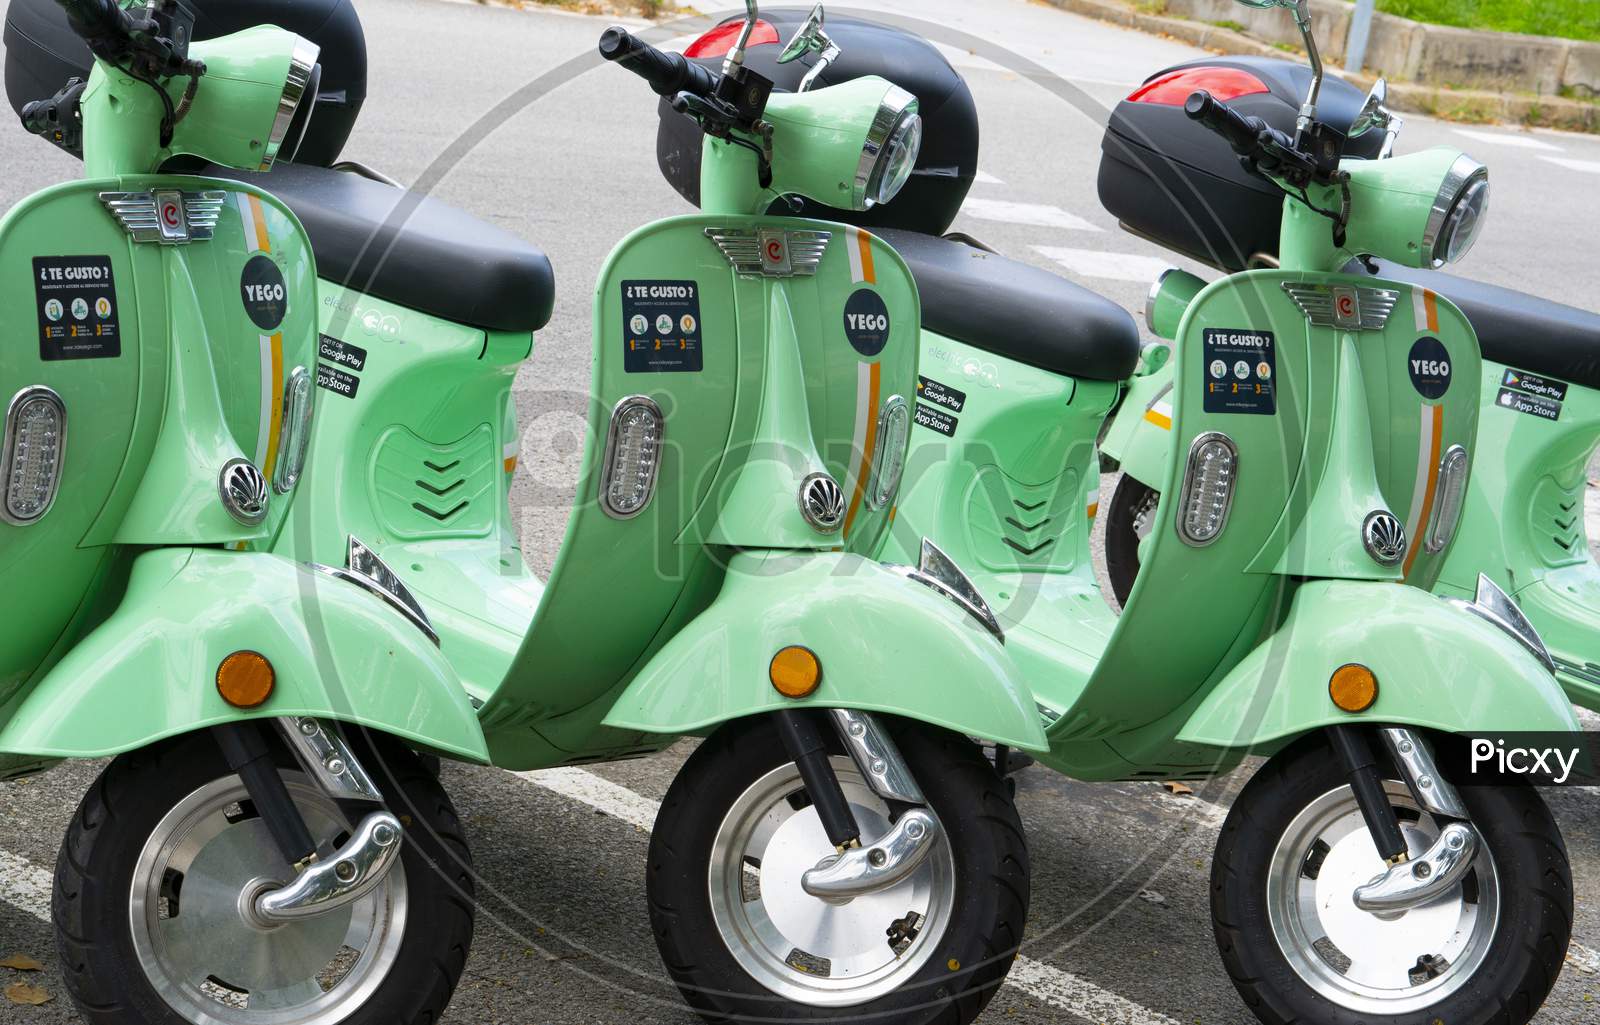 Yego electric rideshare zero emissions scooters wait for riders on the street.